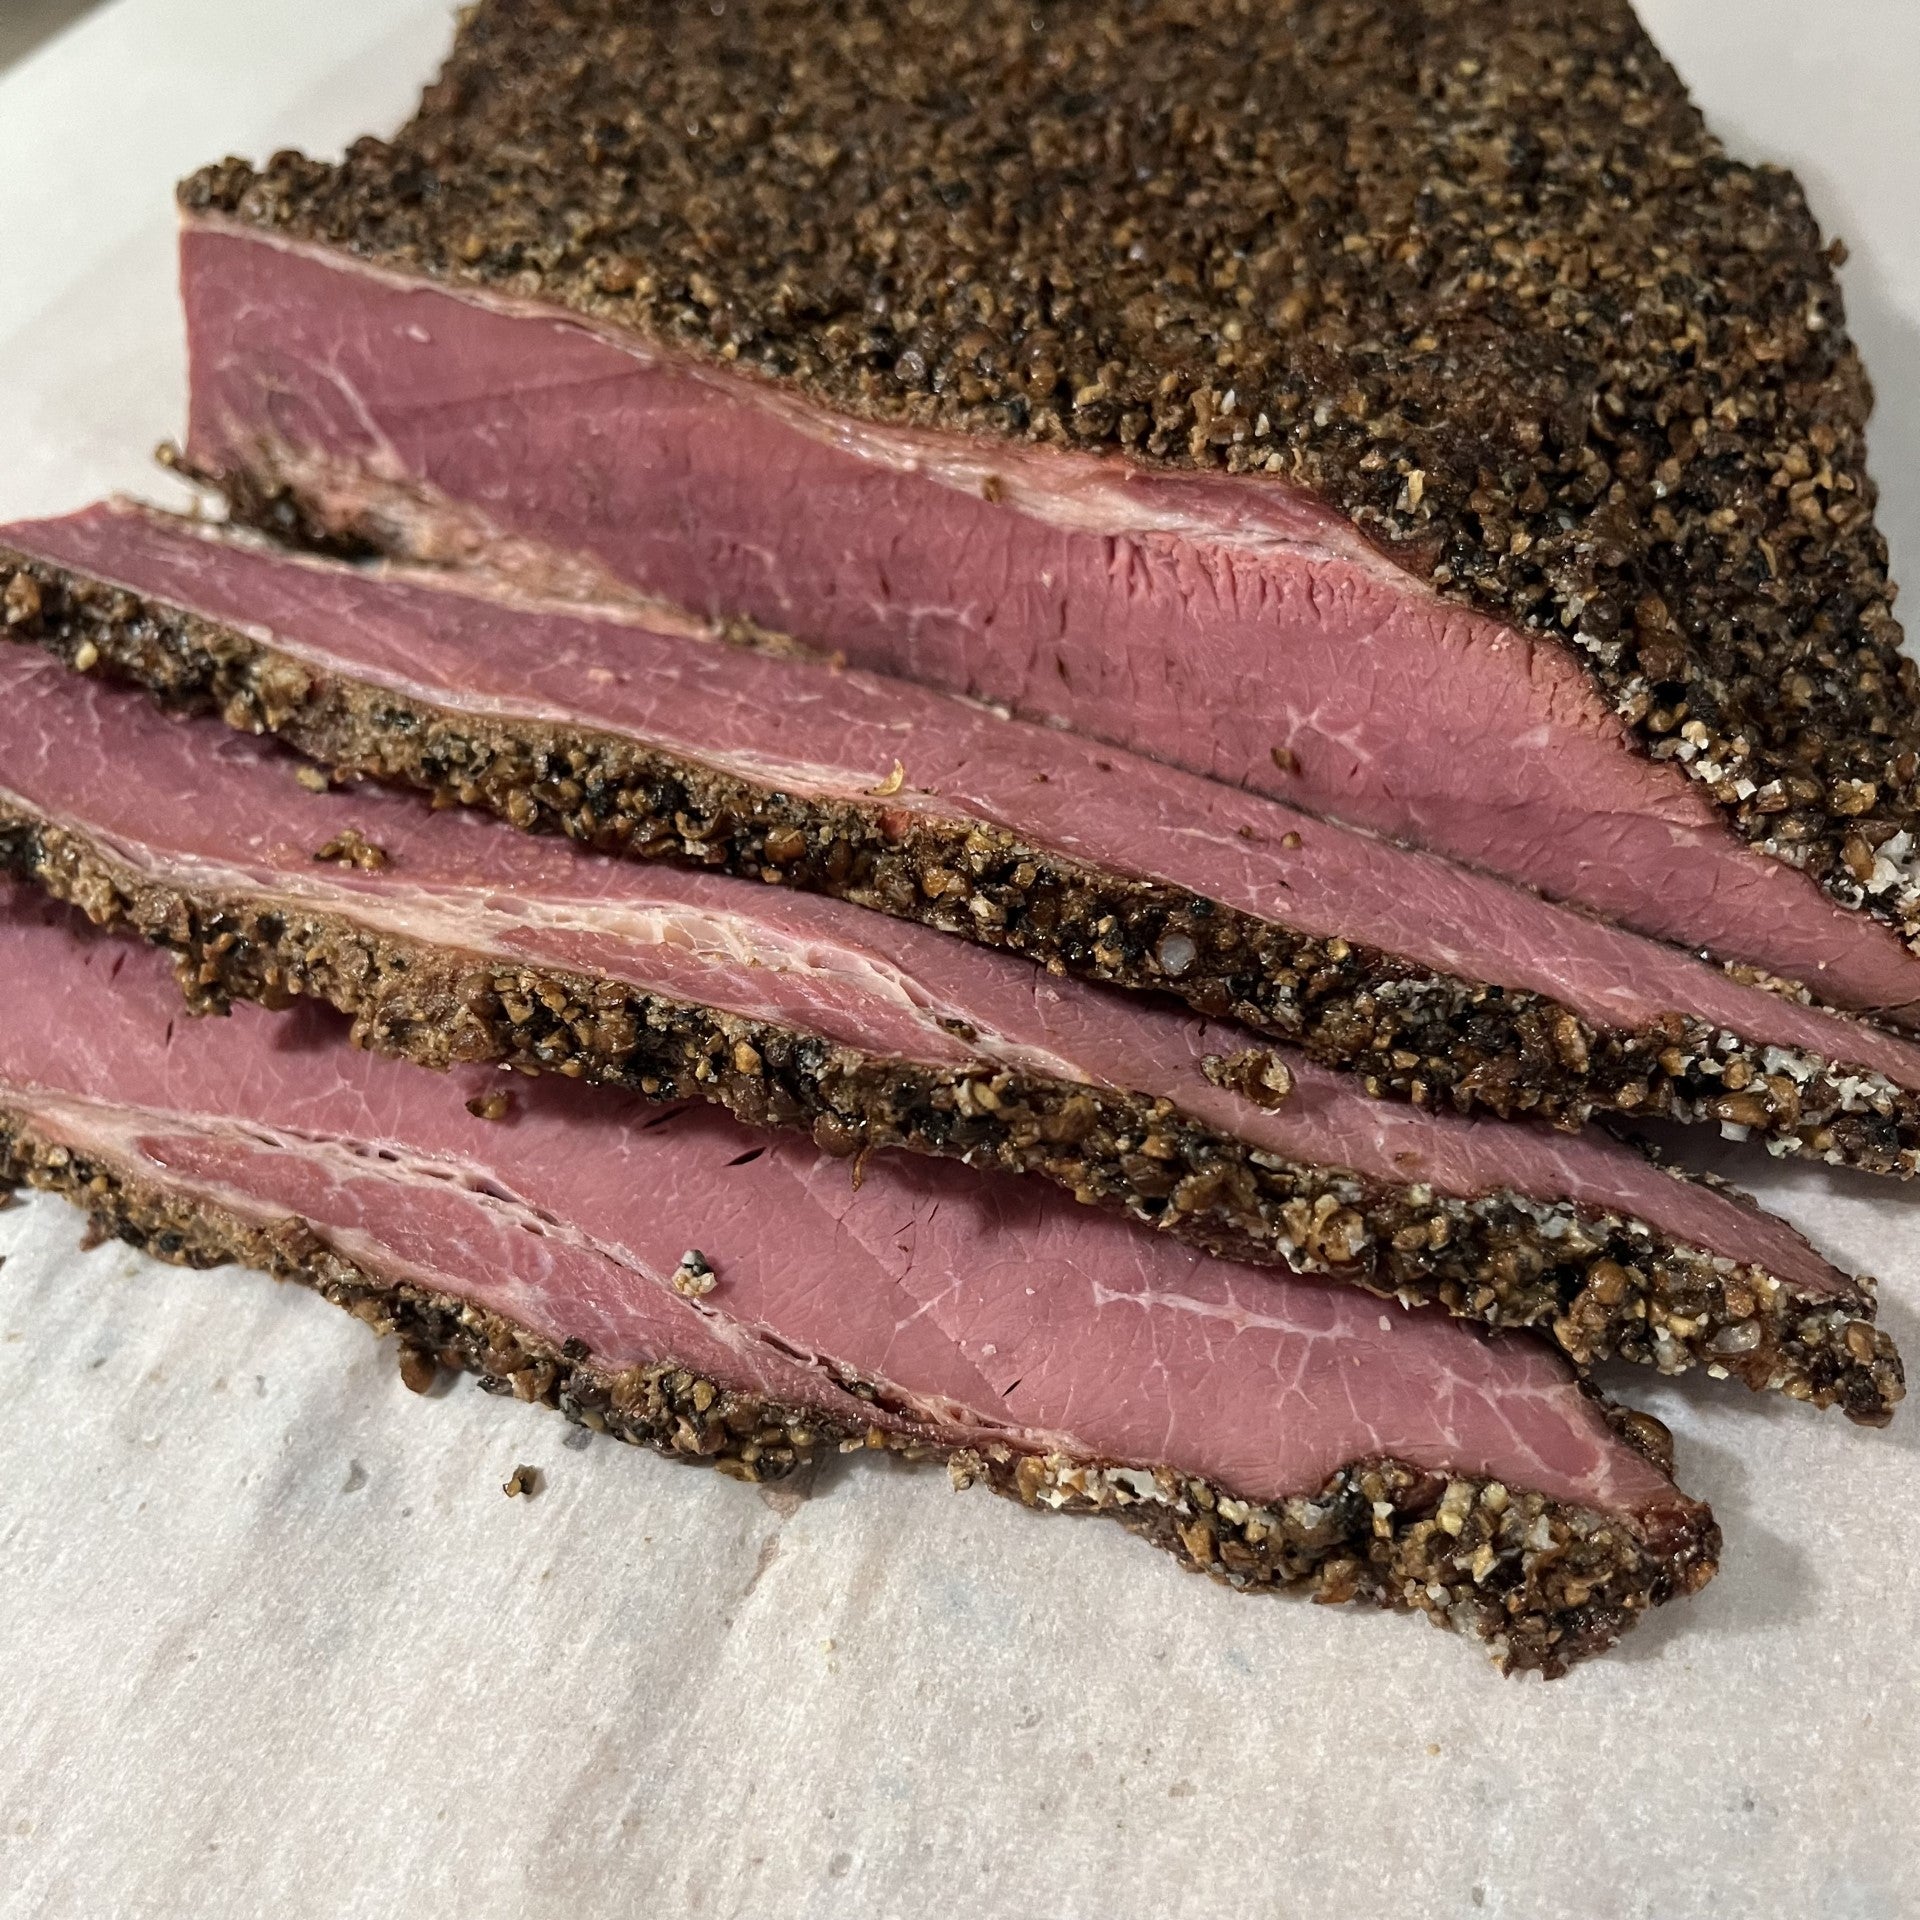 Smoked Old World Pickle Brined Pastrami